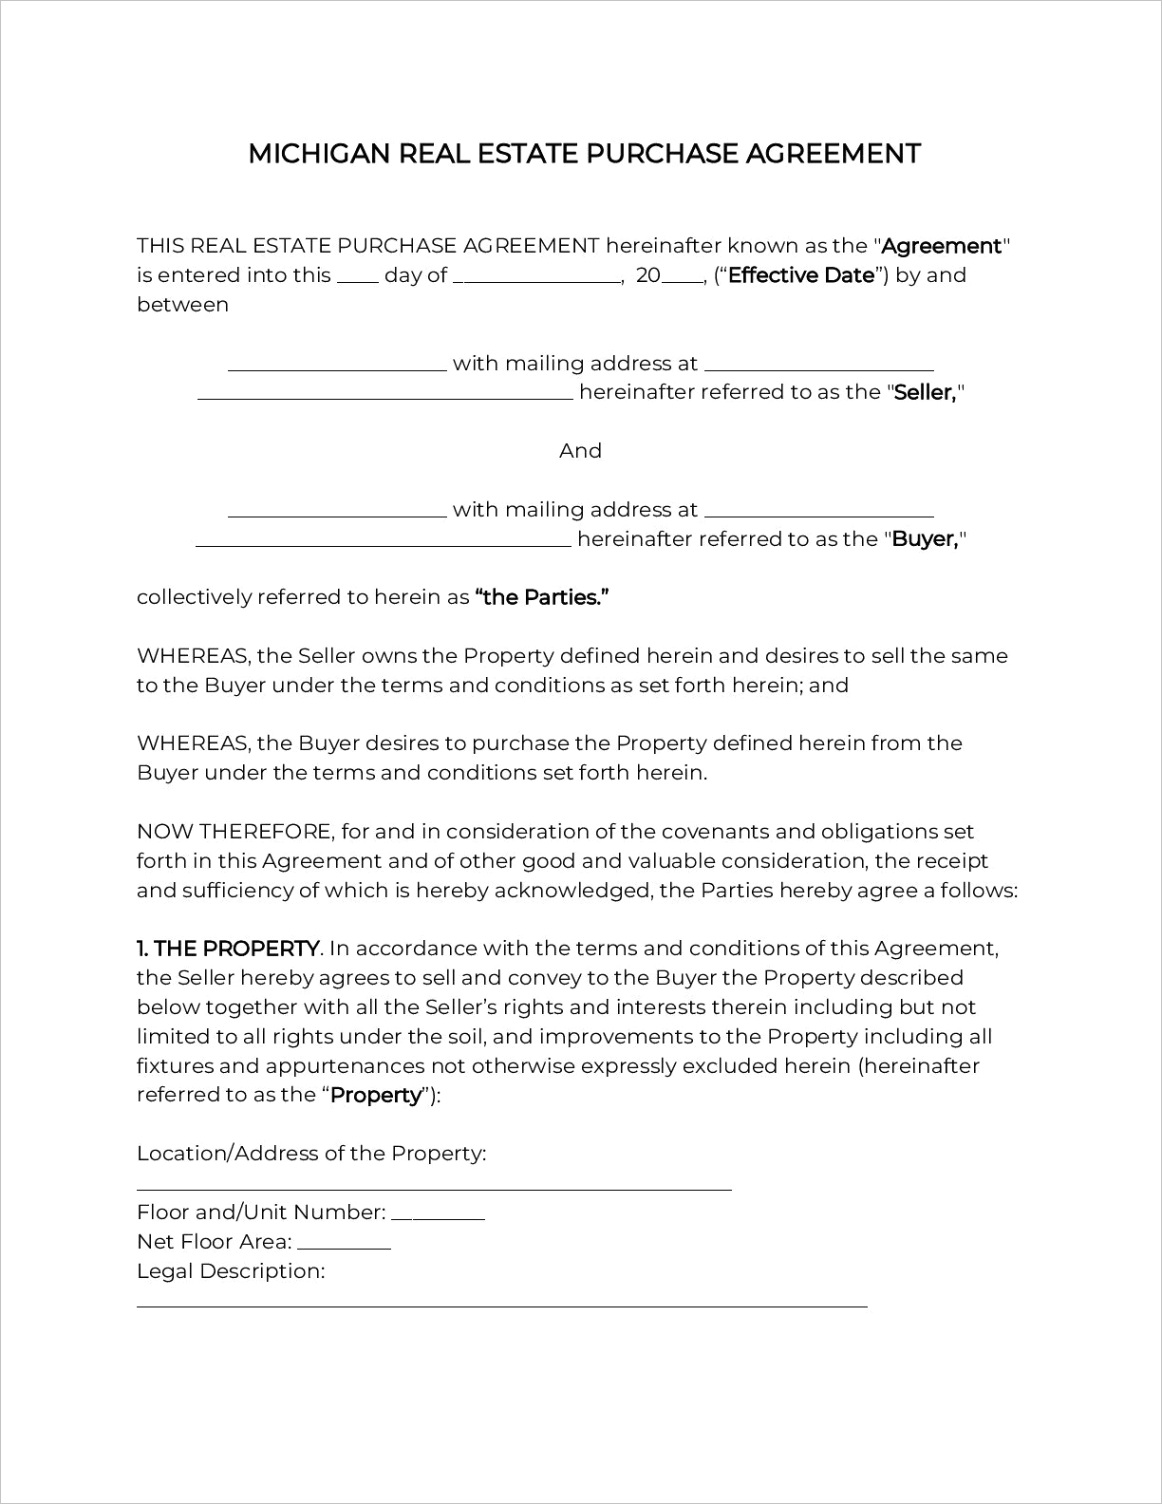 michigan real estate purchase agreement